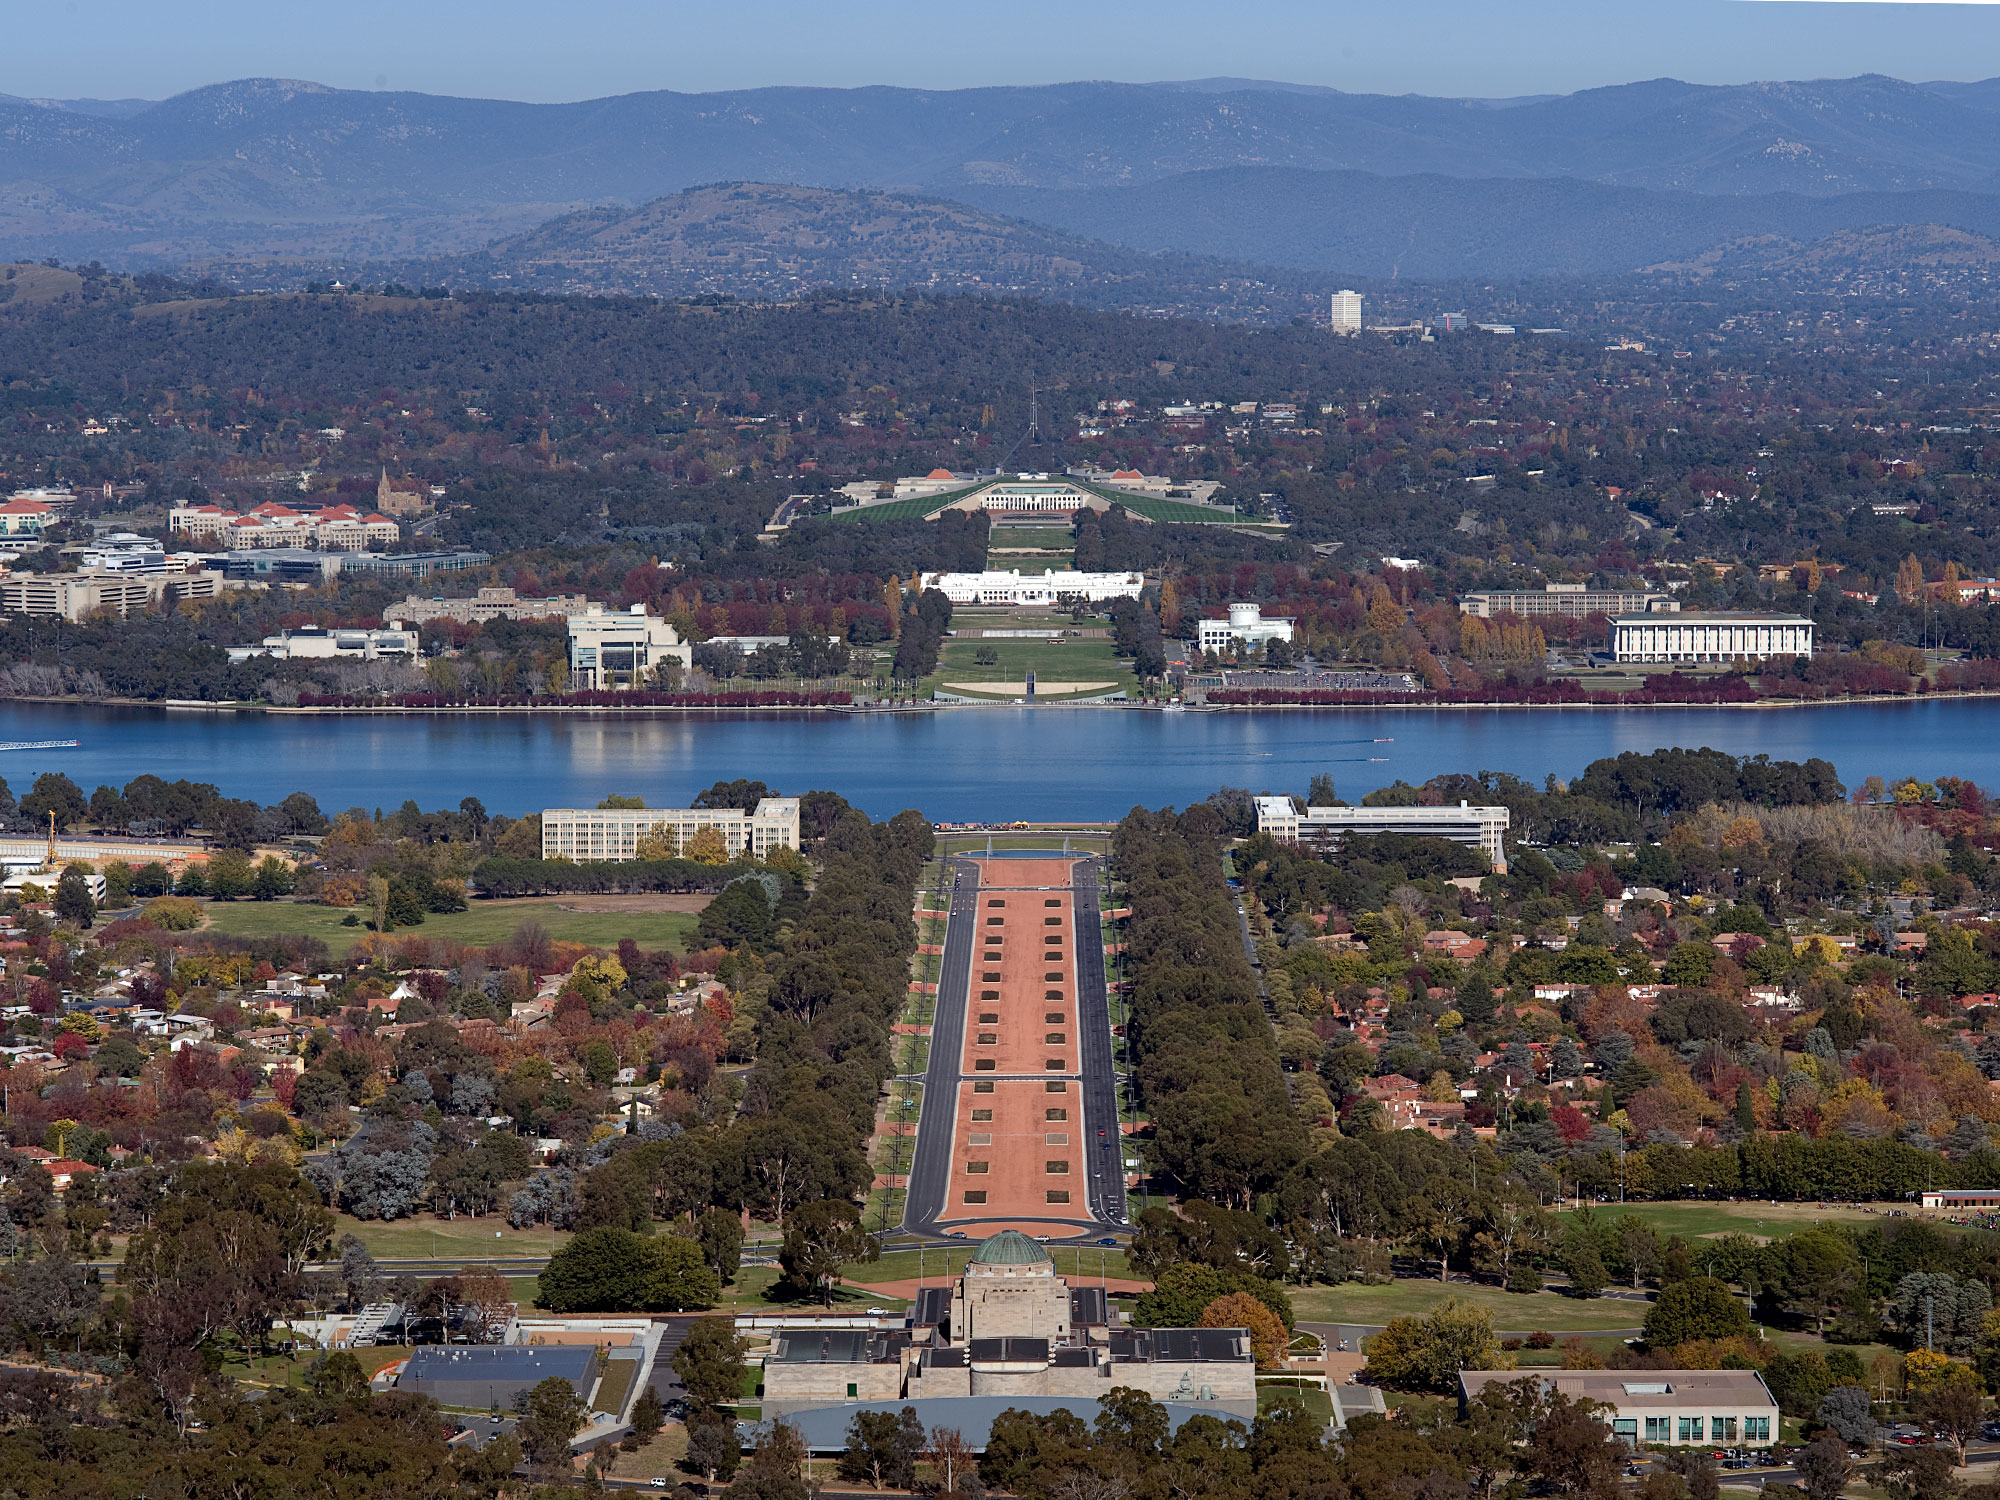 Property market update: Canberra’s future looks bright